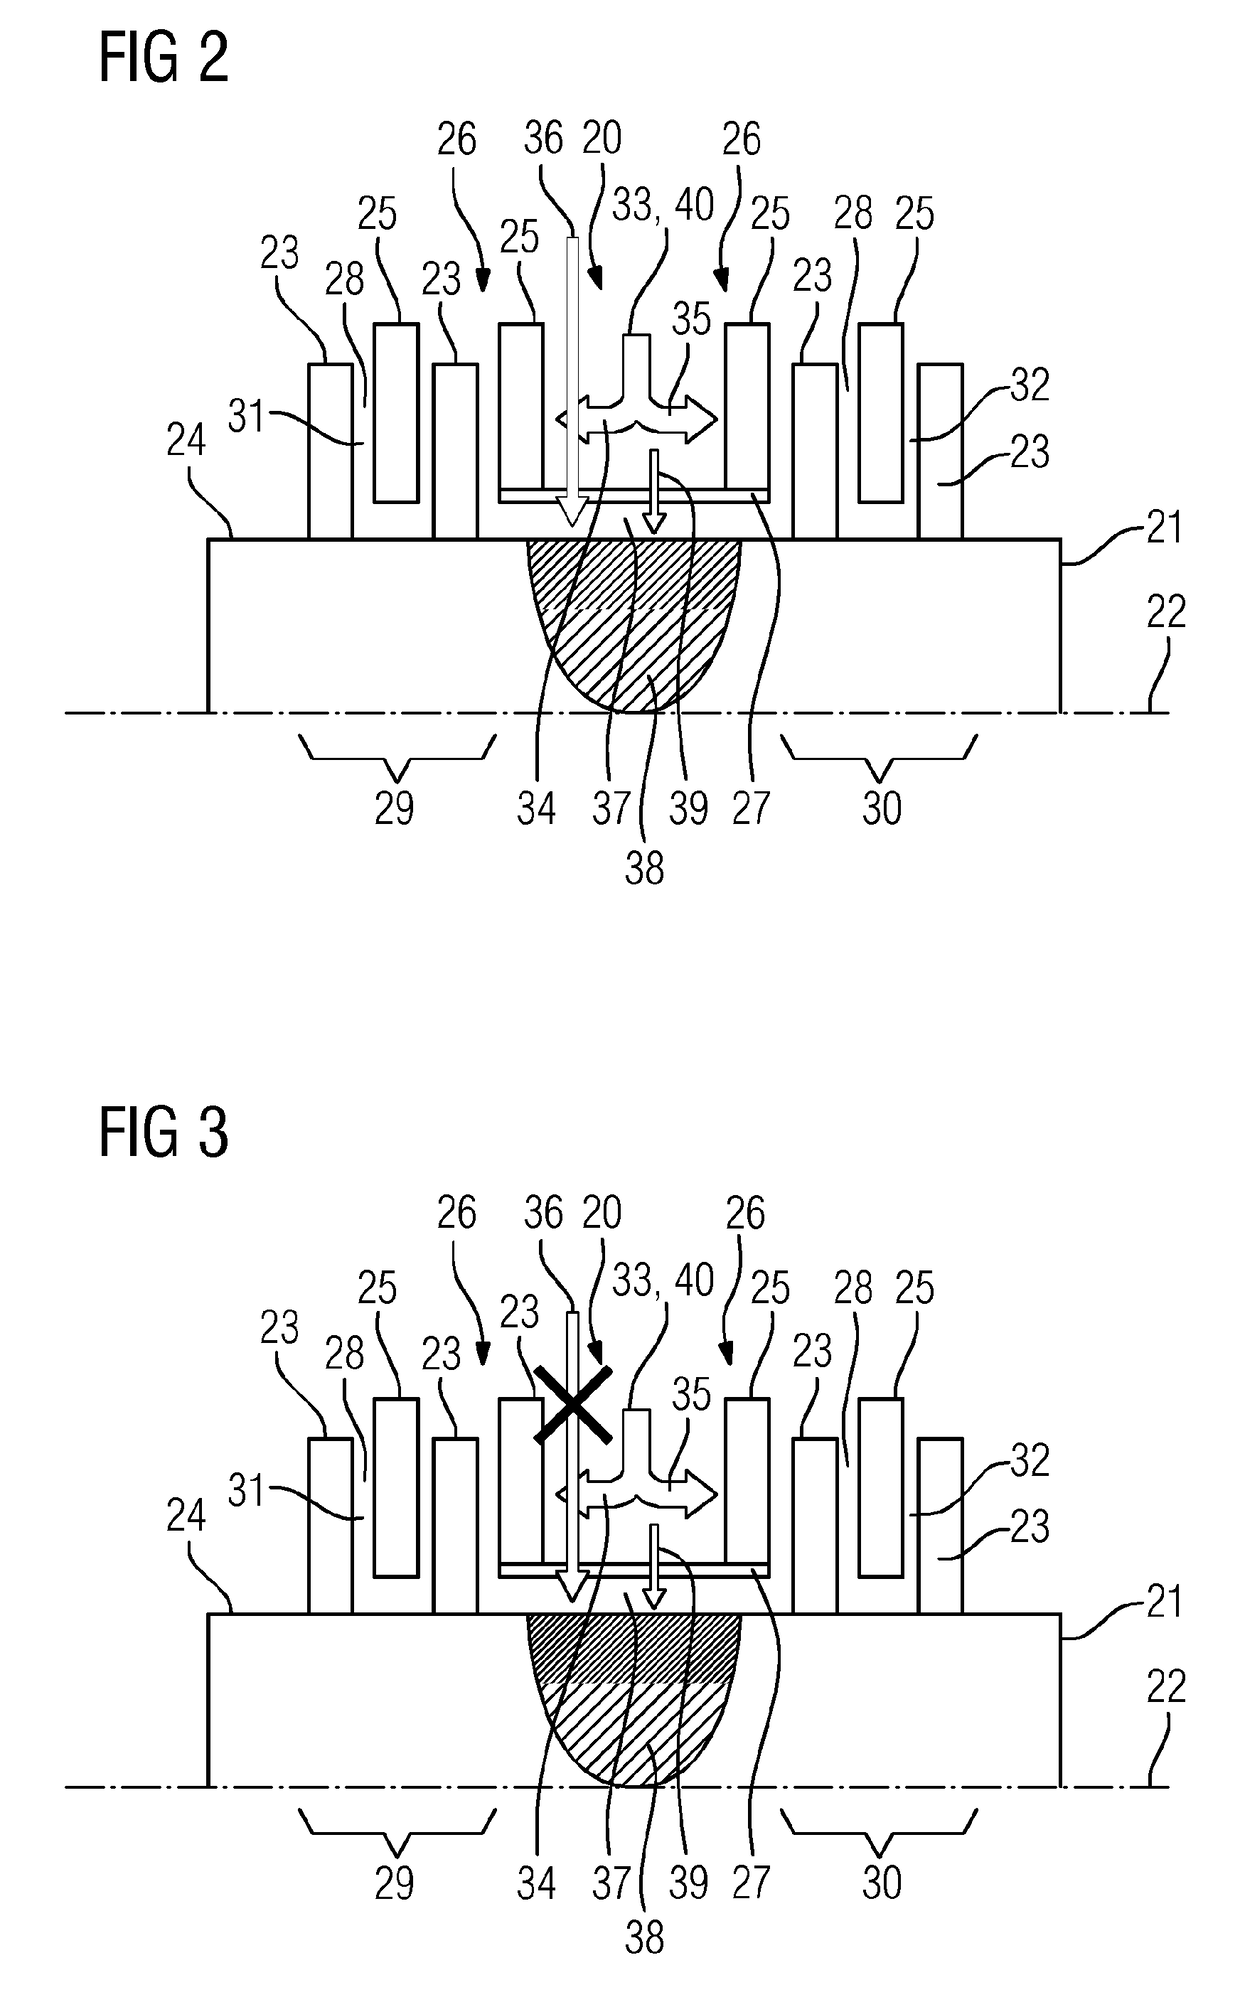 Controlled cooling of turbine shafts